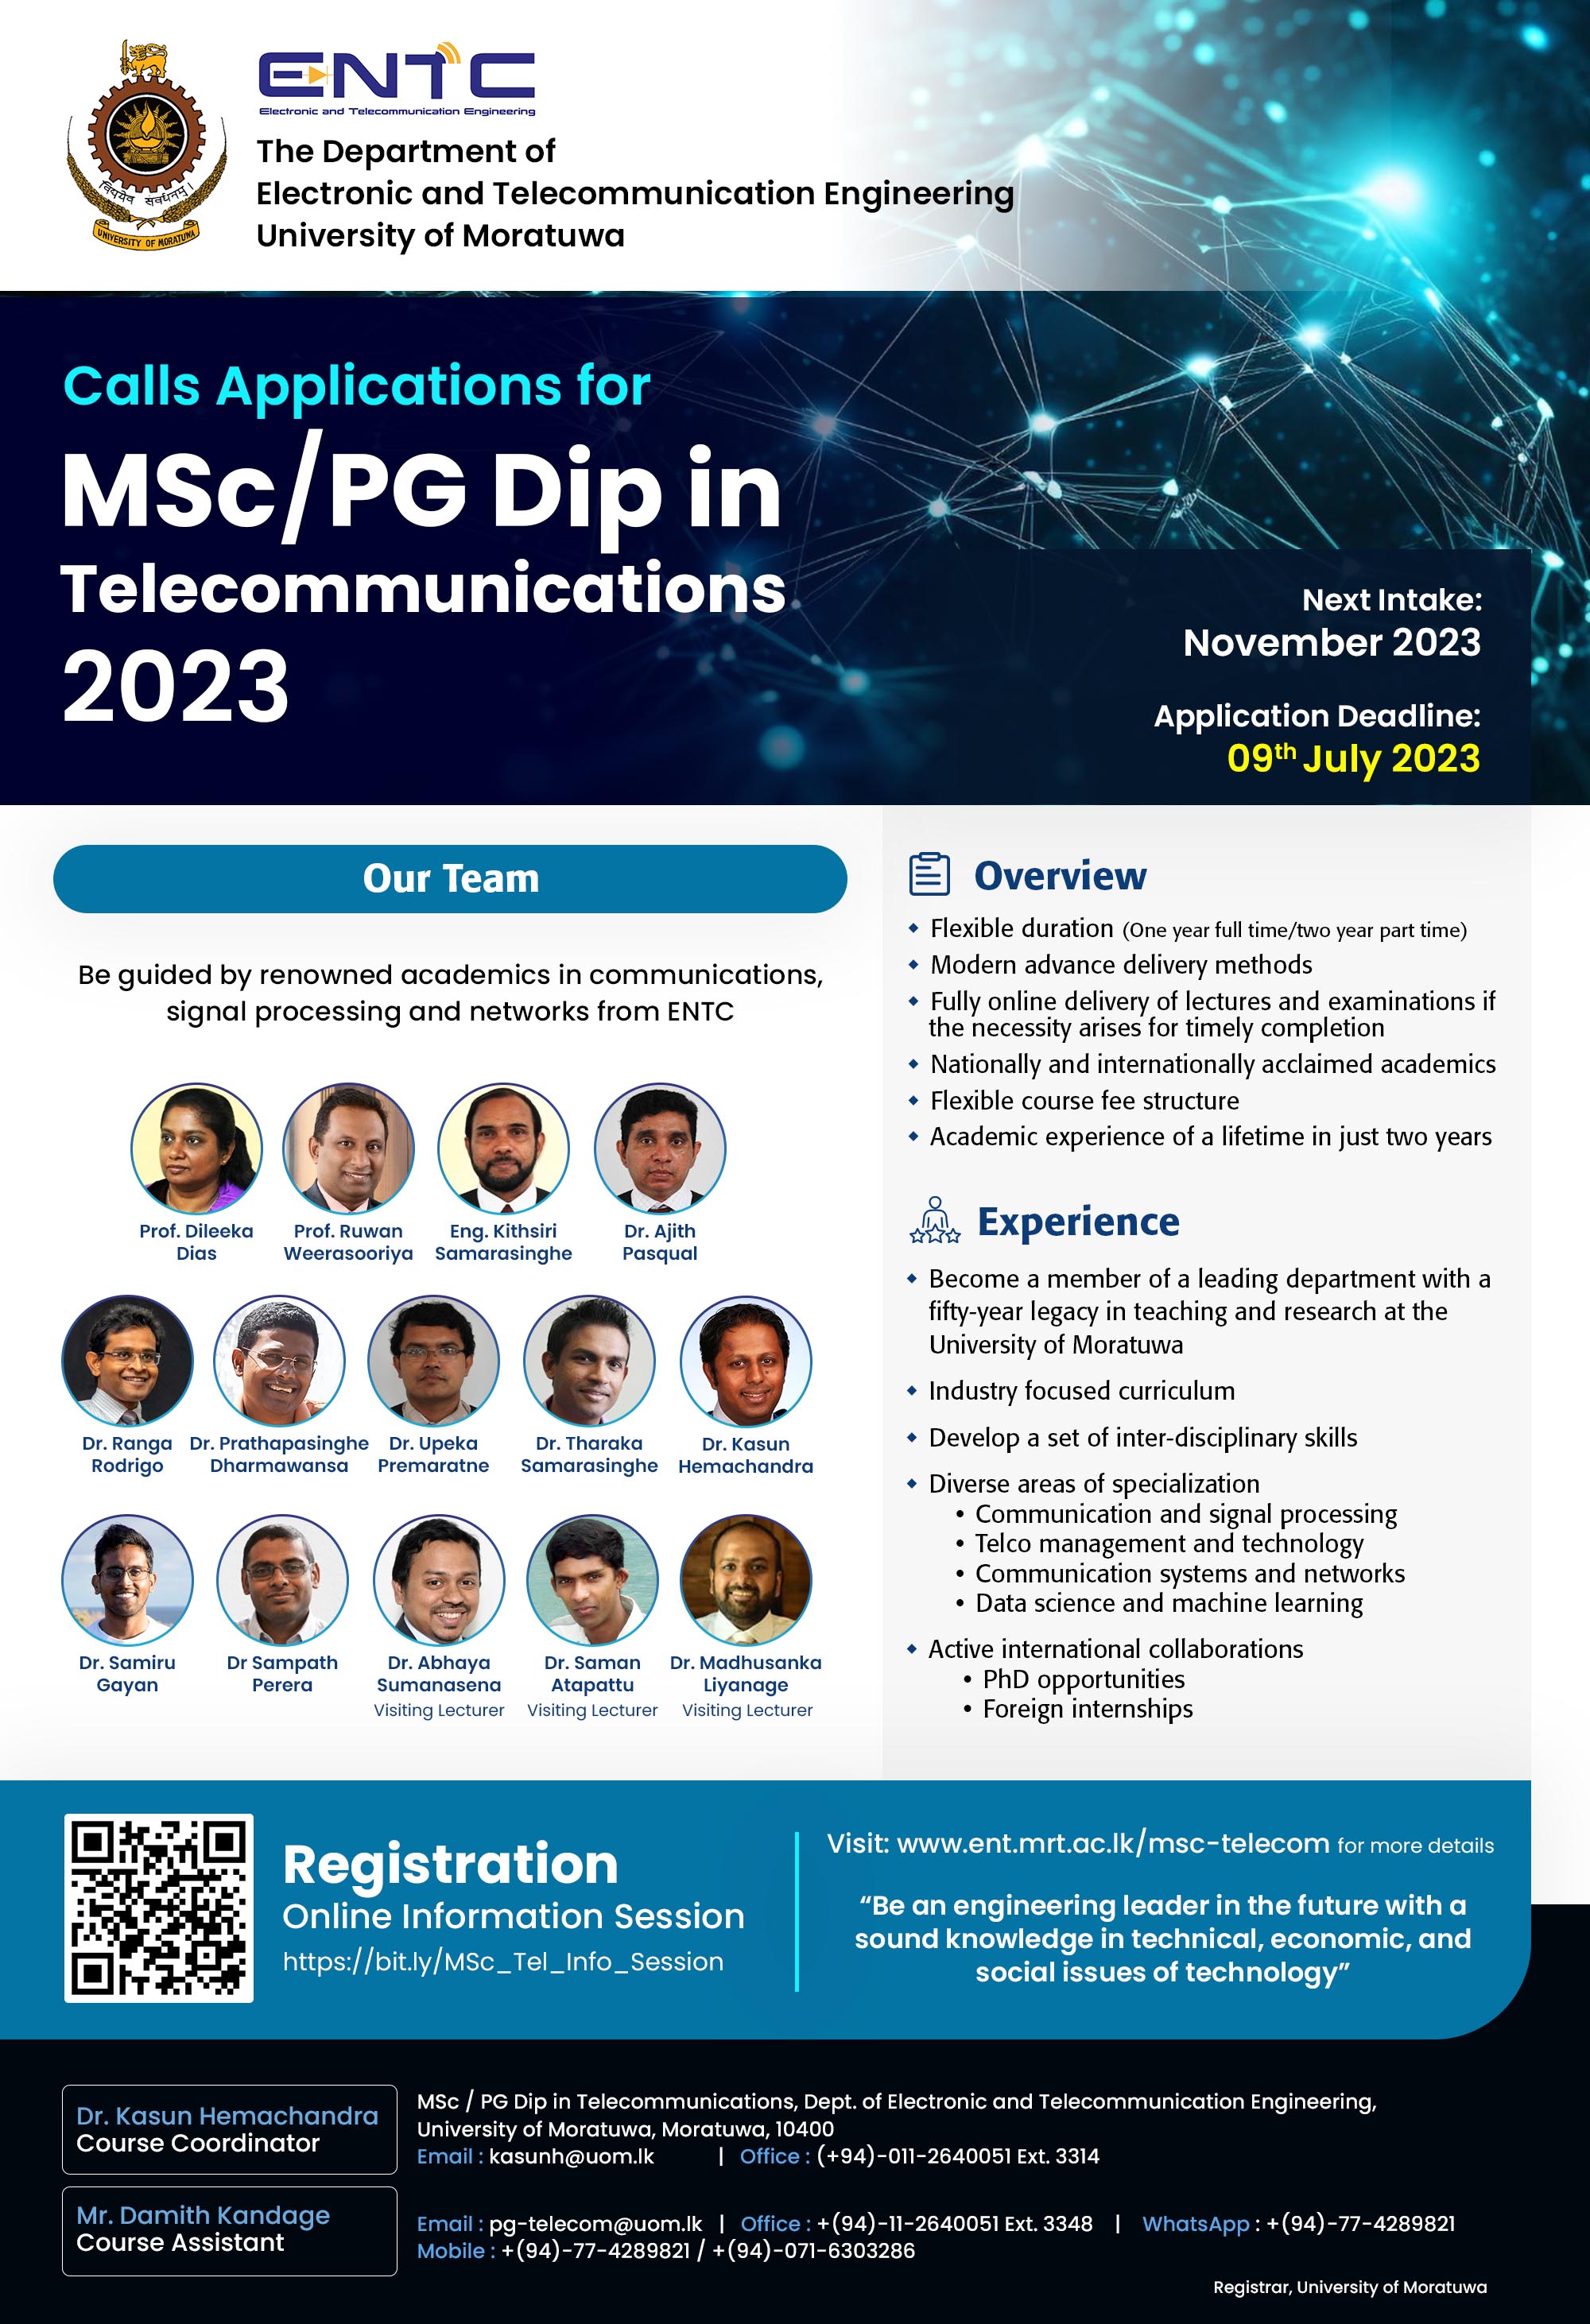 MSc/PG Diploma in Telecommunications